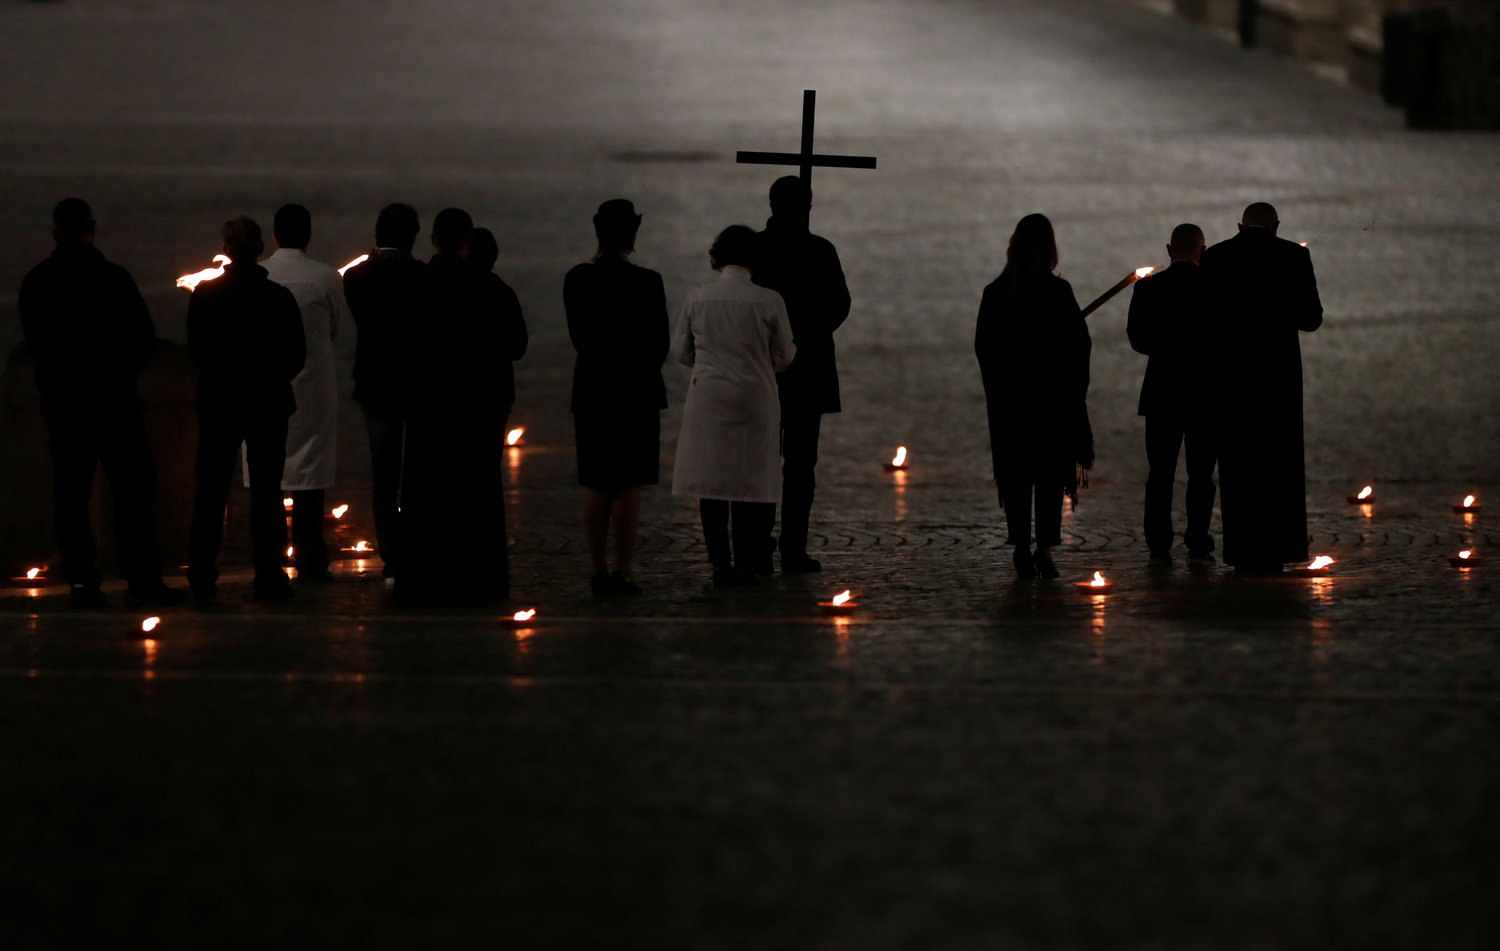 Health care and prison workers attend the Via Crucis procession led by Pope Francis in St. Peter’s Square at the Vatican April 10, 2020. The Good Friday service was held with no public participation because of the COVID-19 pandemic.